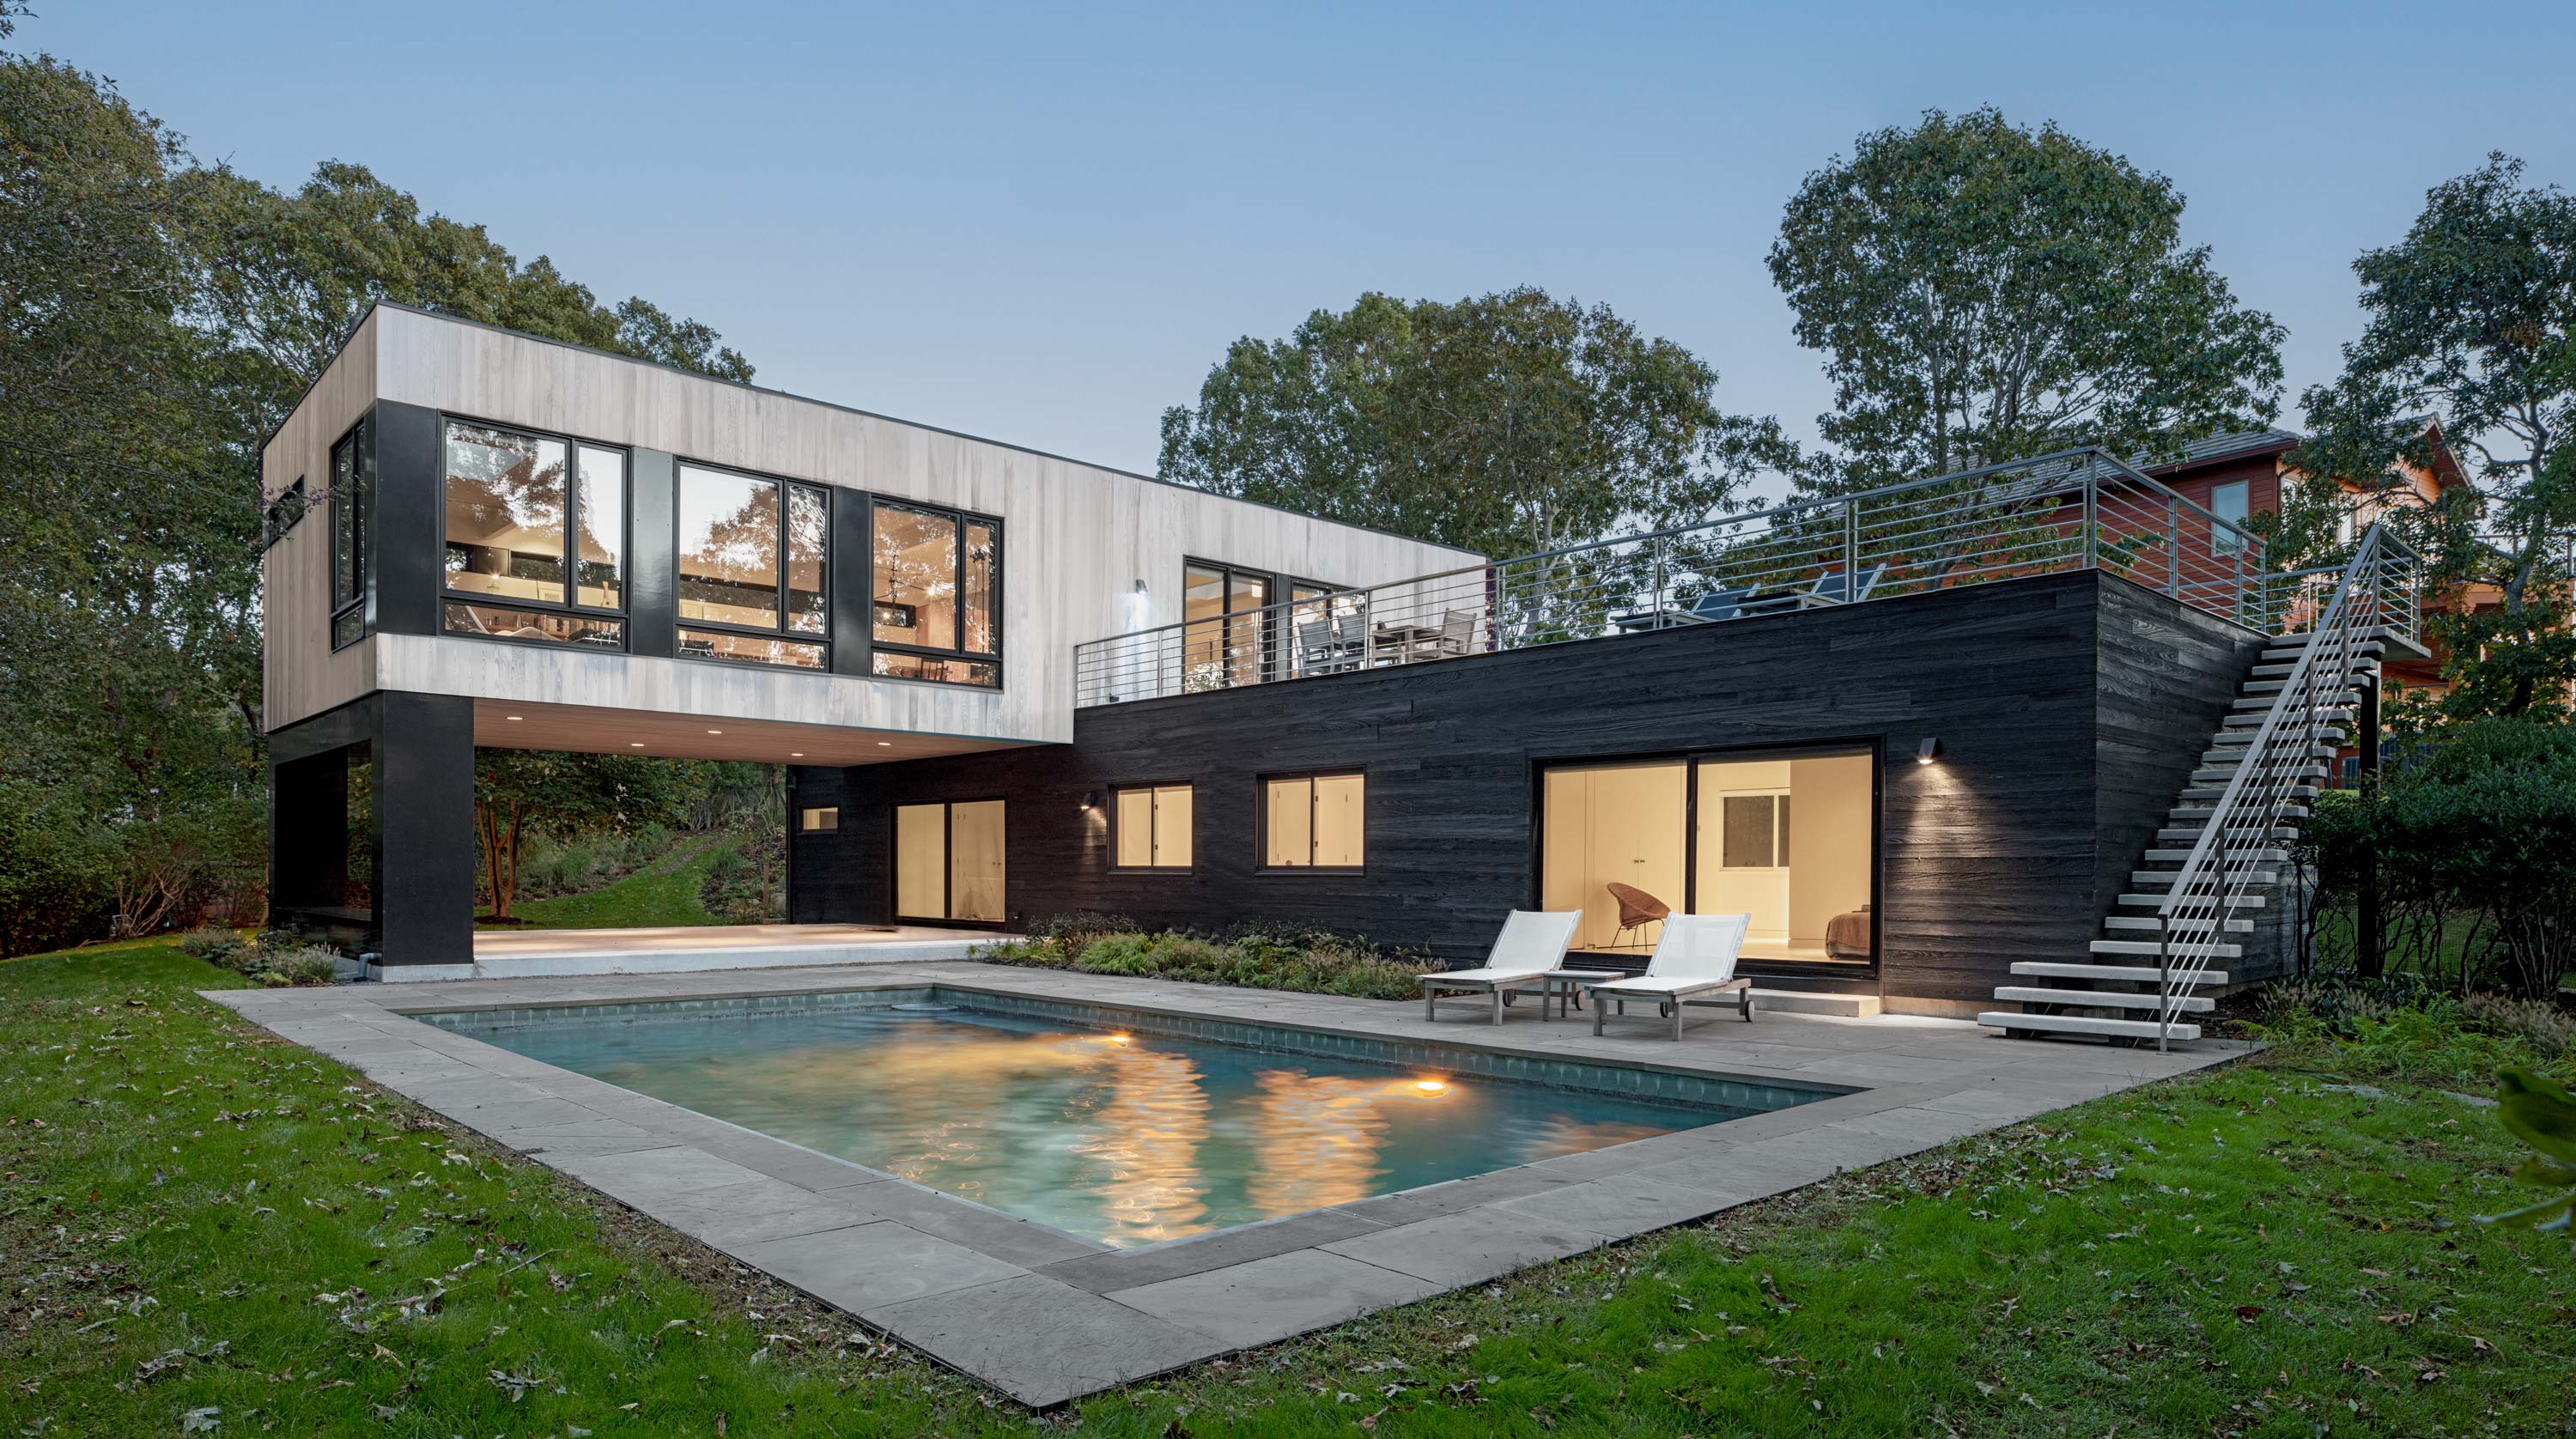 Exterior of Bridgehampton House by Specht Novak Architects showcasing utilitarian materials, roof terrace, pool, and industrial exterior staircase. Shot by Taggart Sorensen.